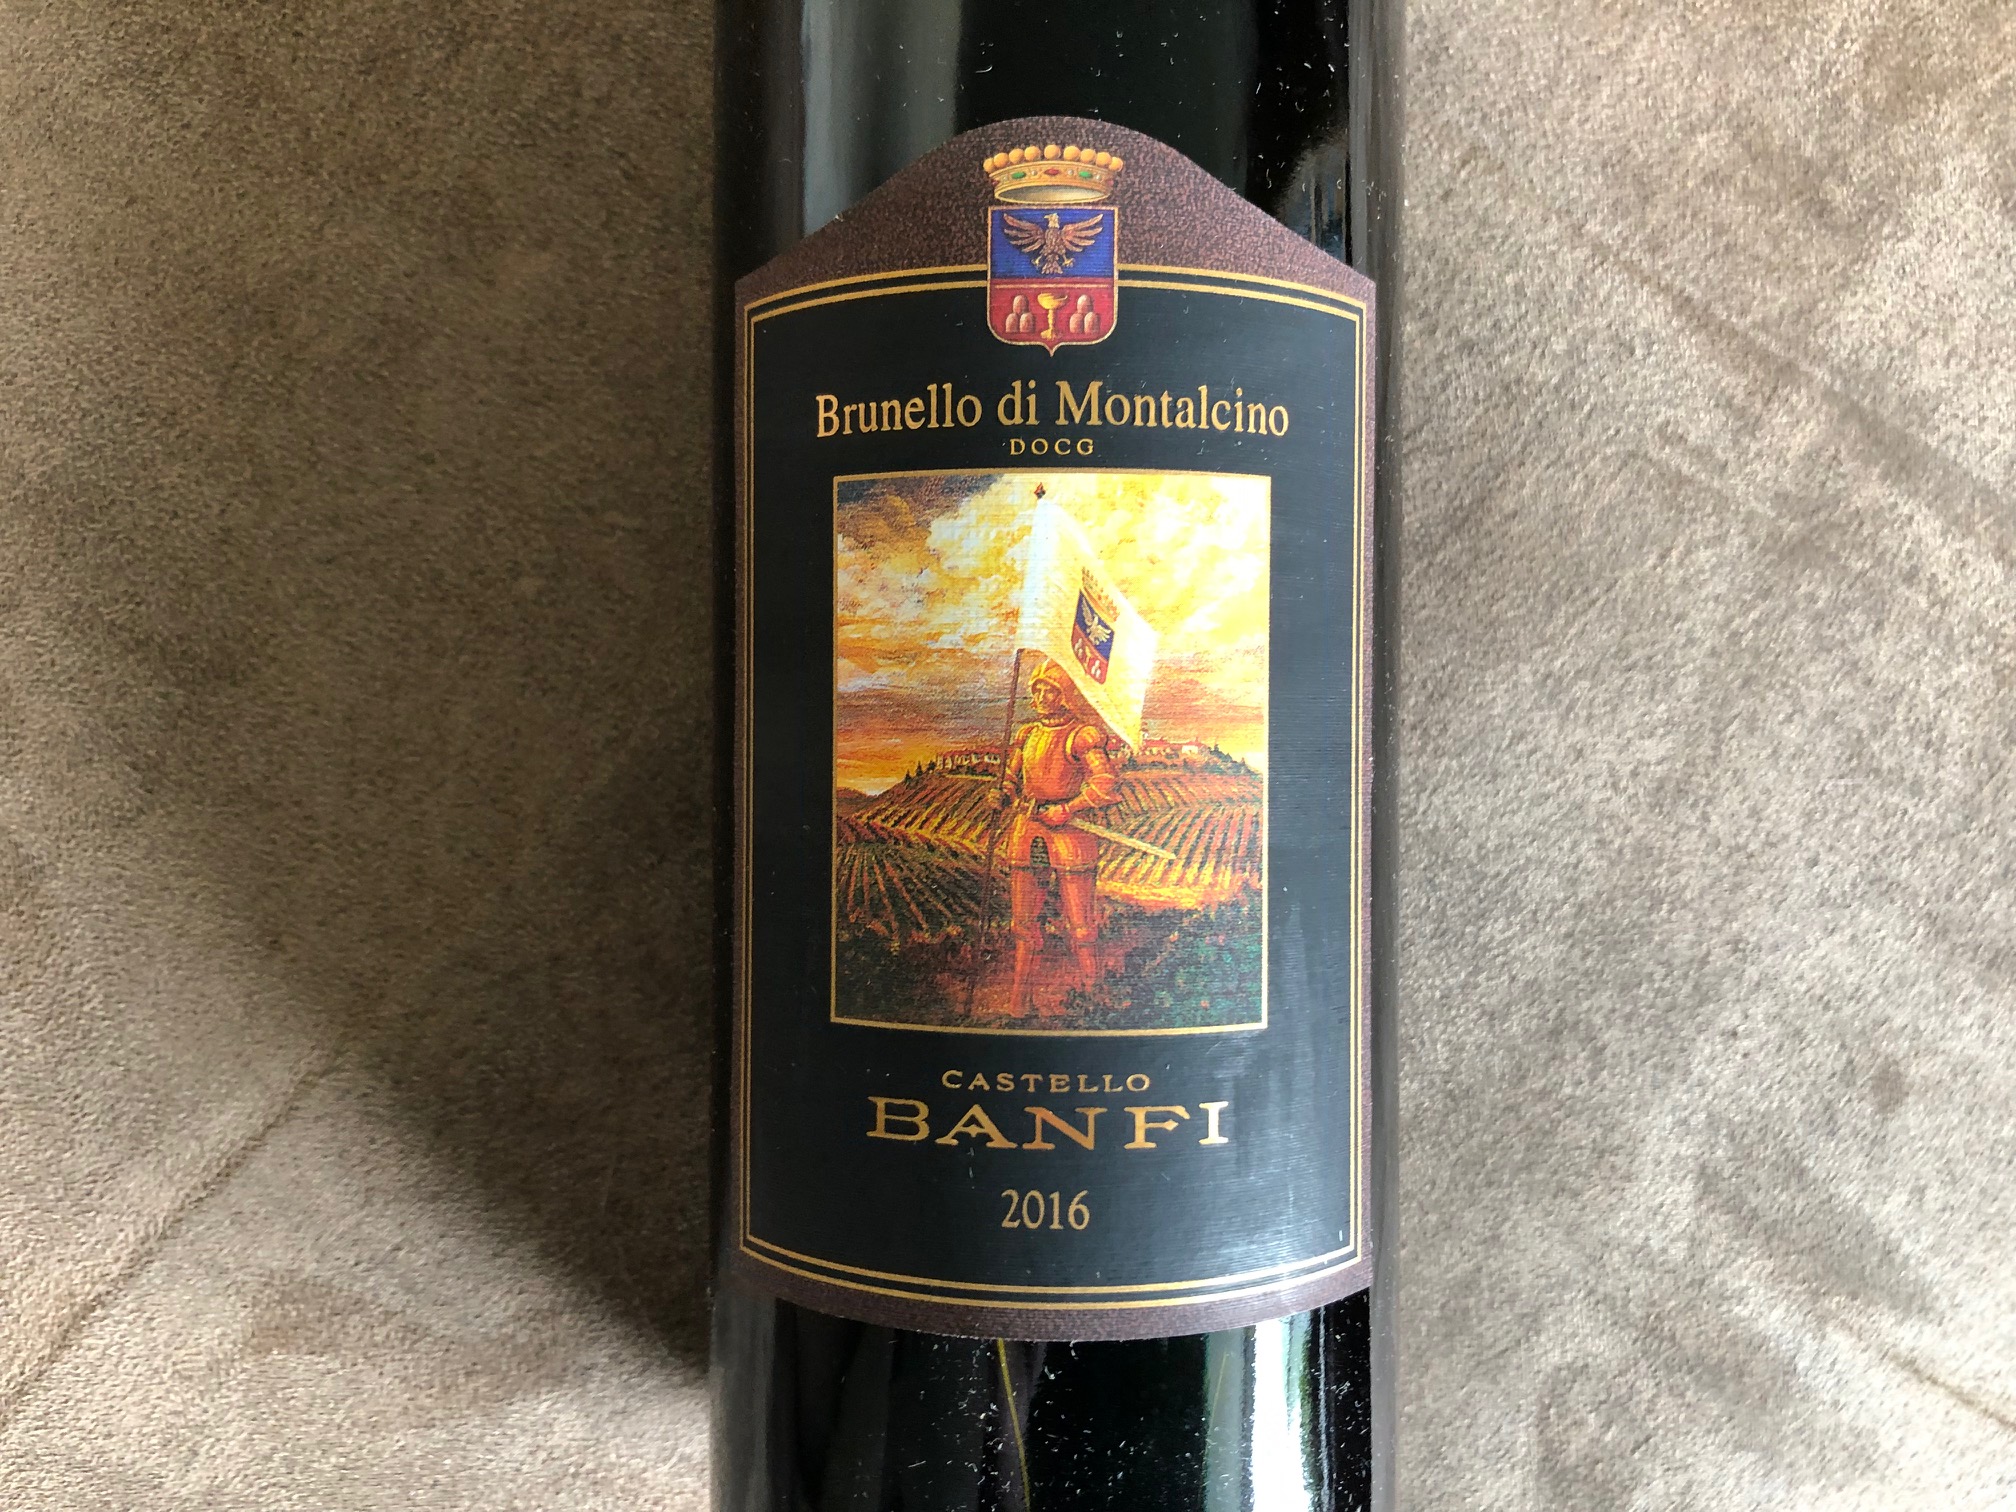 Wine Press: Tuscany's Banfi Winery creates outstanding red wines 